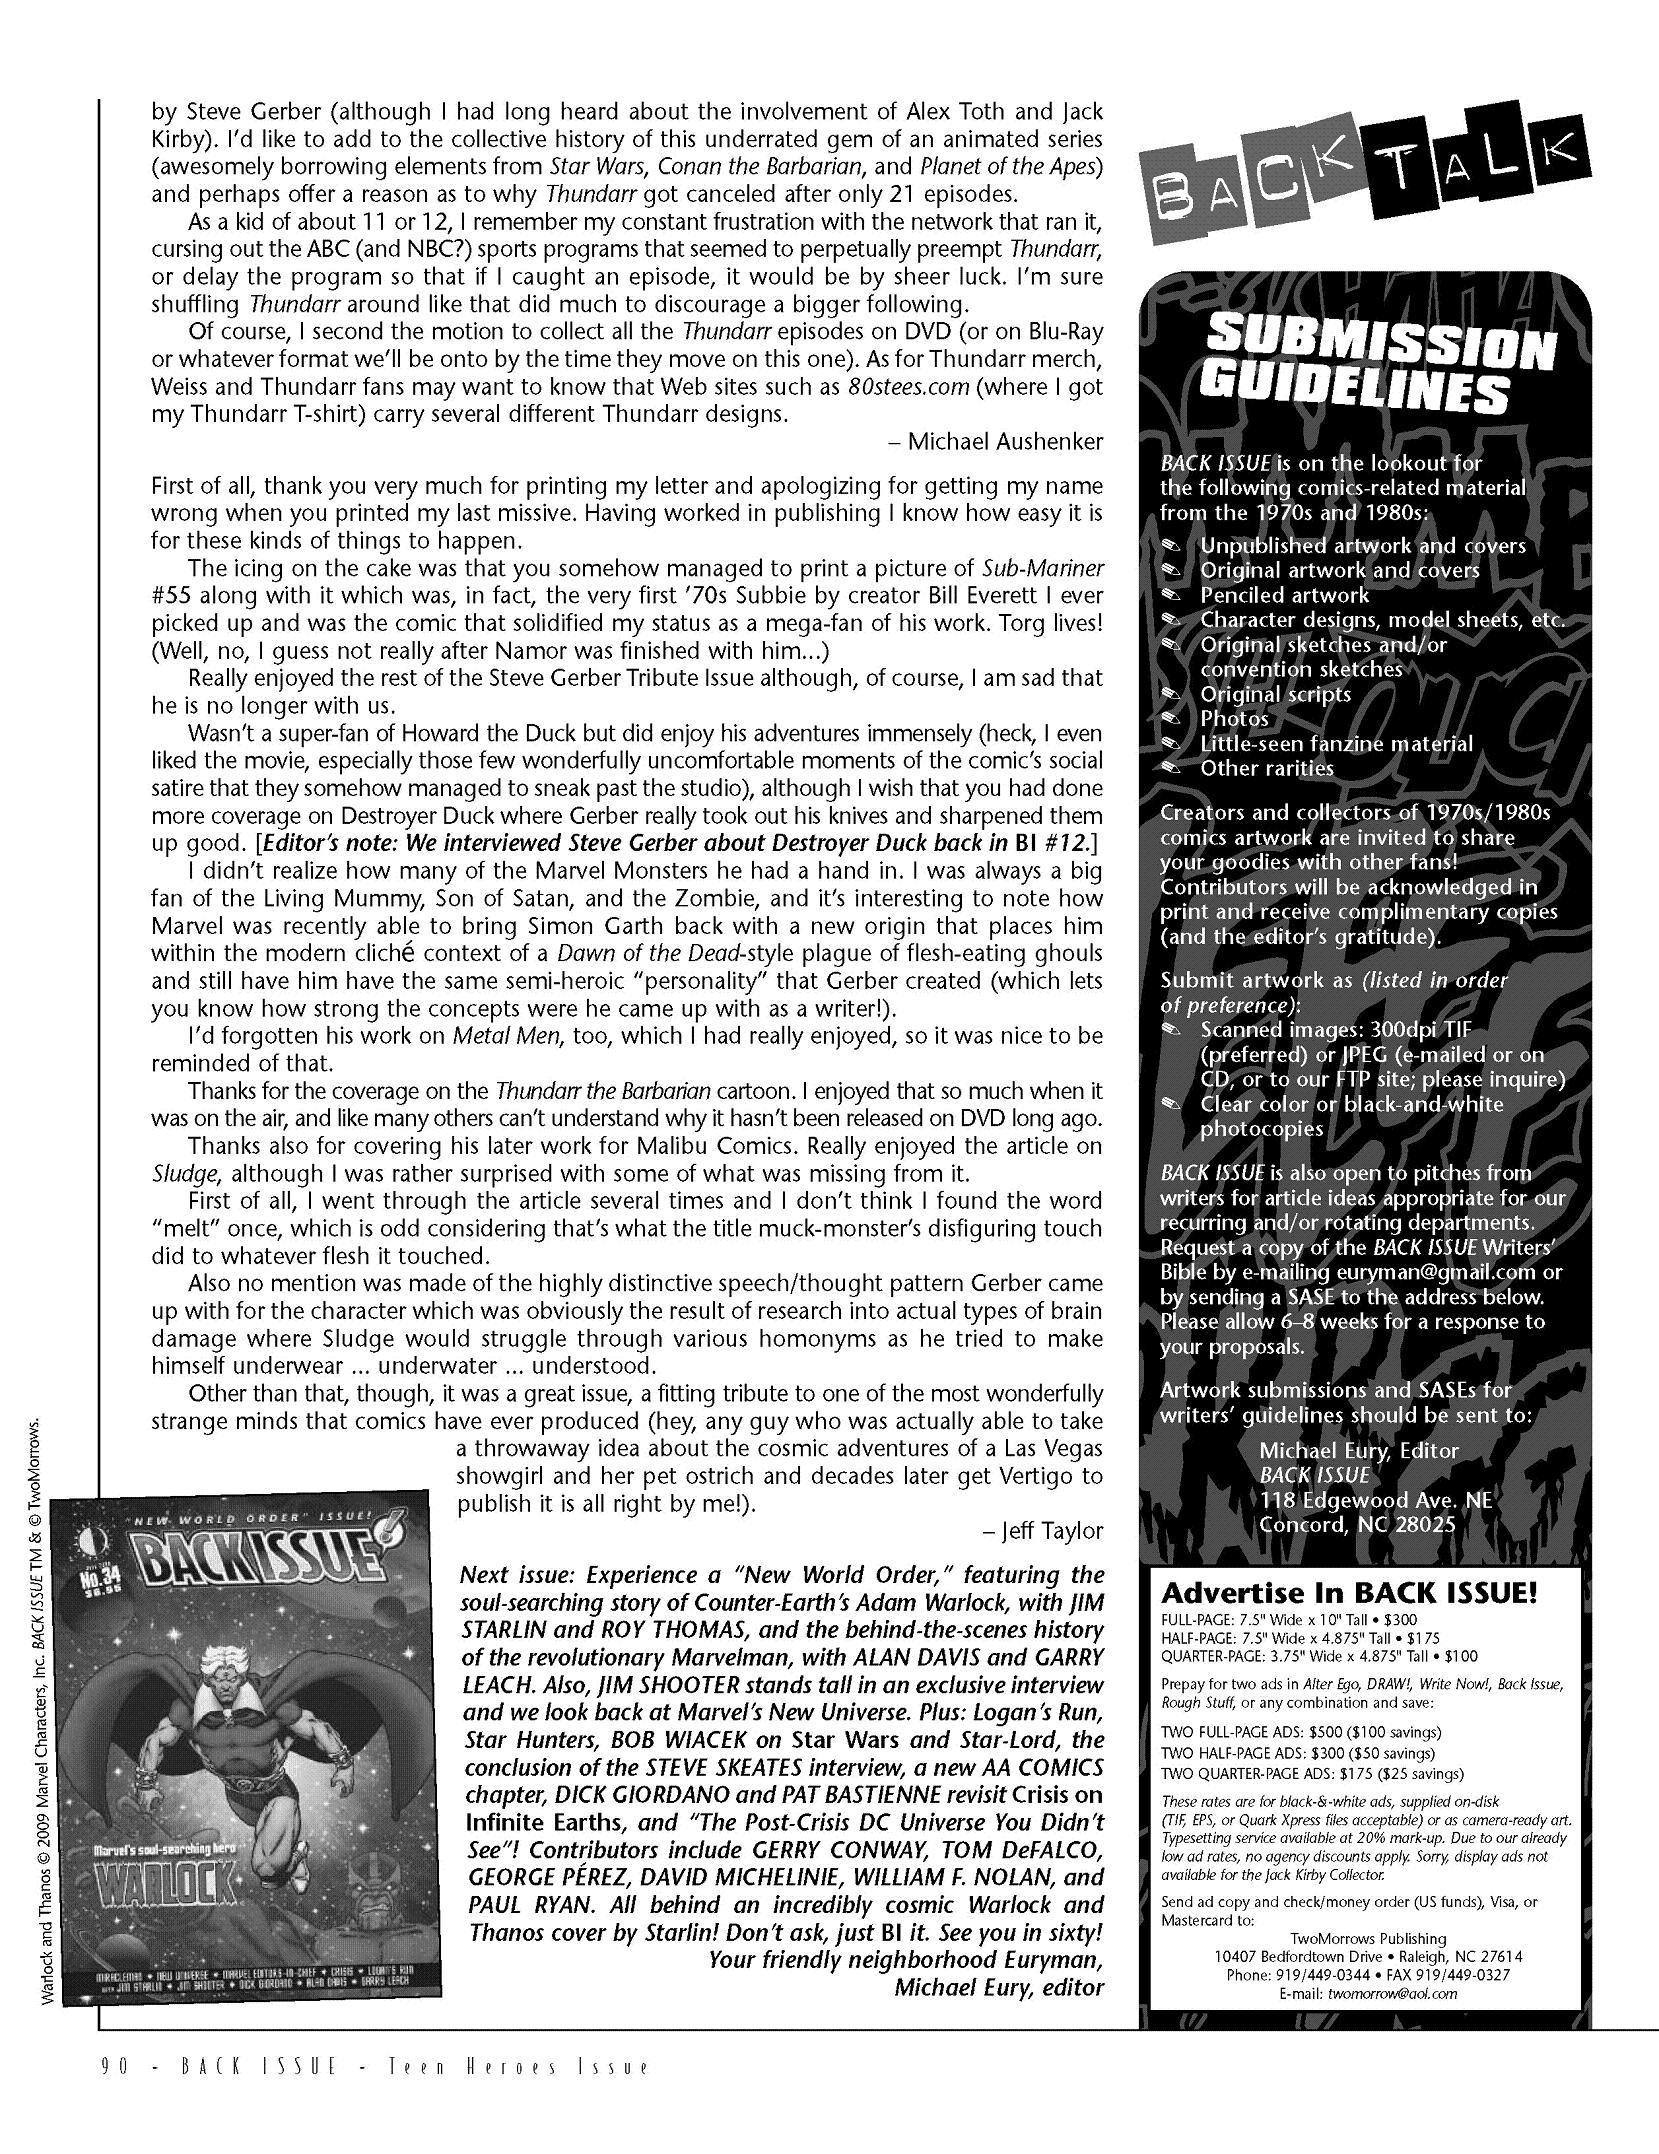 Read online Back Issue comic -  Issue #33 - 92